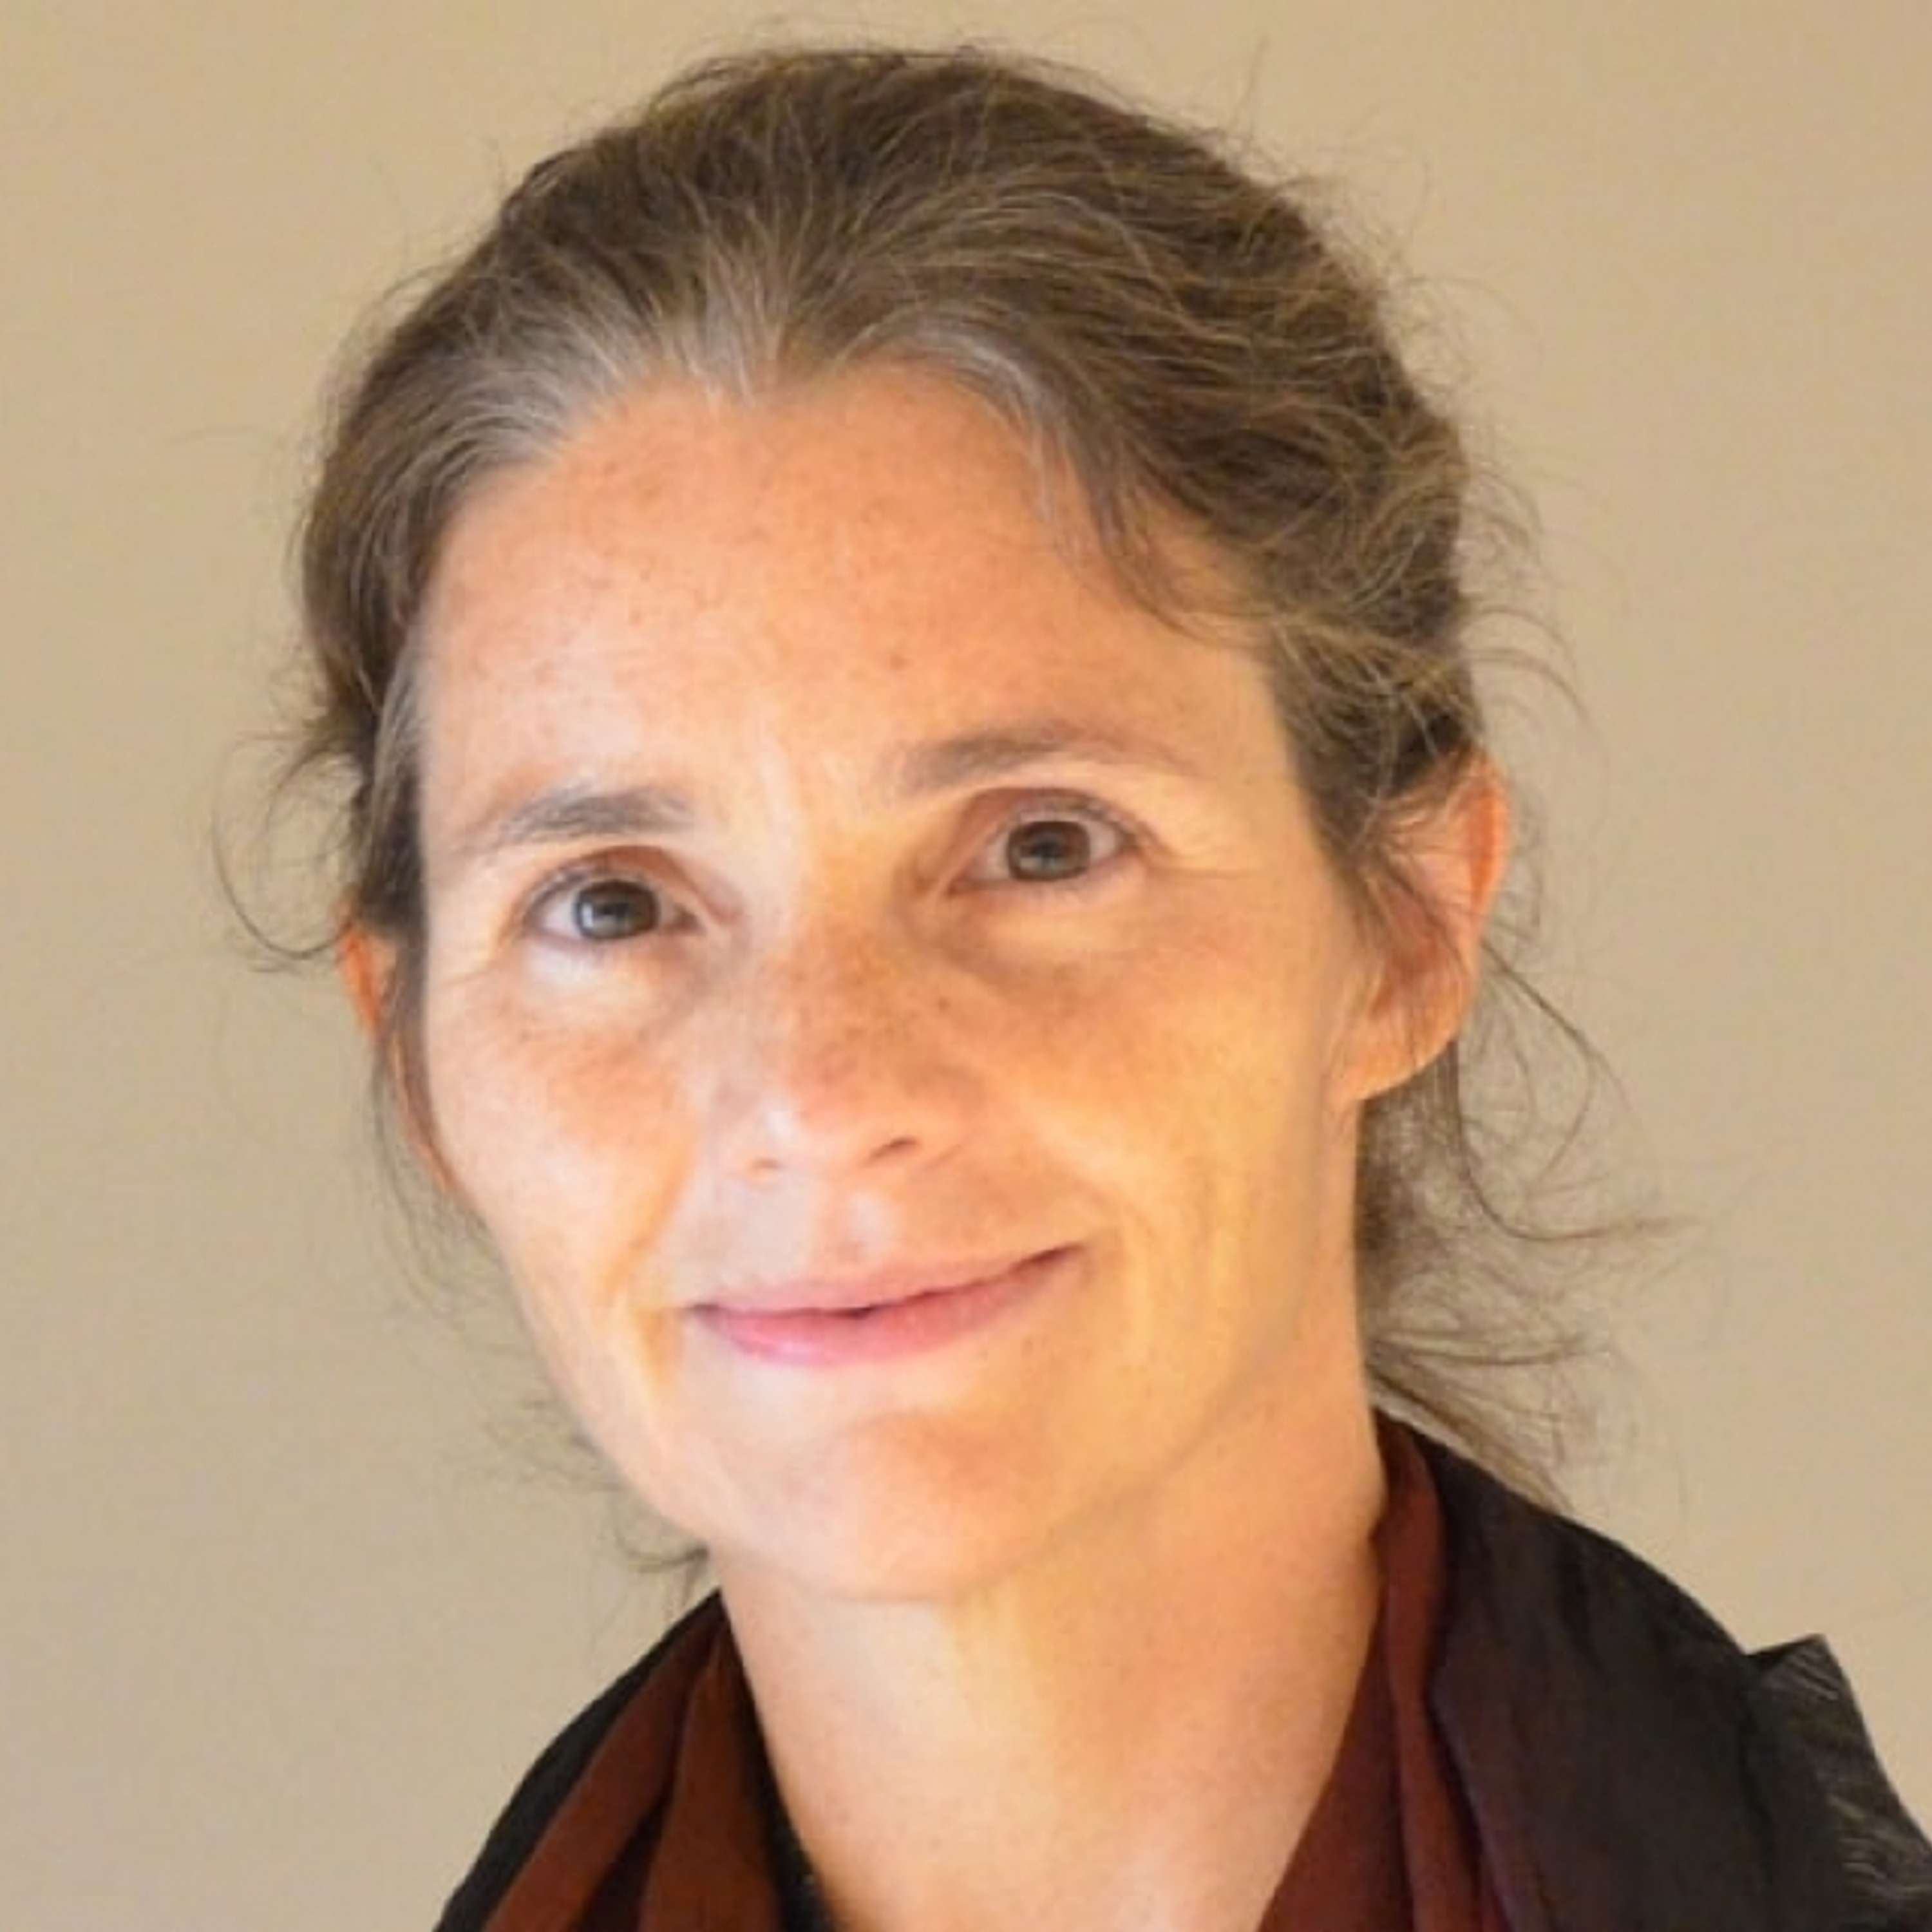 Episode 37: Interview with Sabina Alkire, director of the Oxford Poverty and Human Development Initiative (OPHI: how to effectively measure poverty using the  multidimensional poverty indicator (MPI)